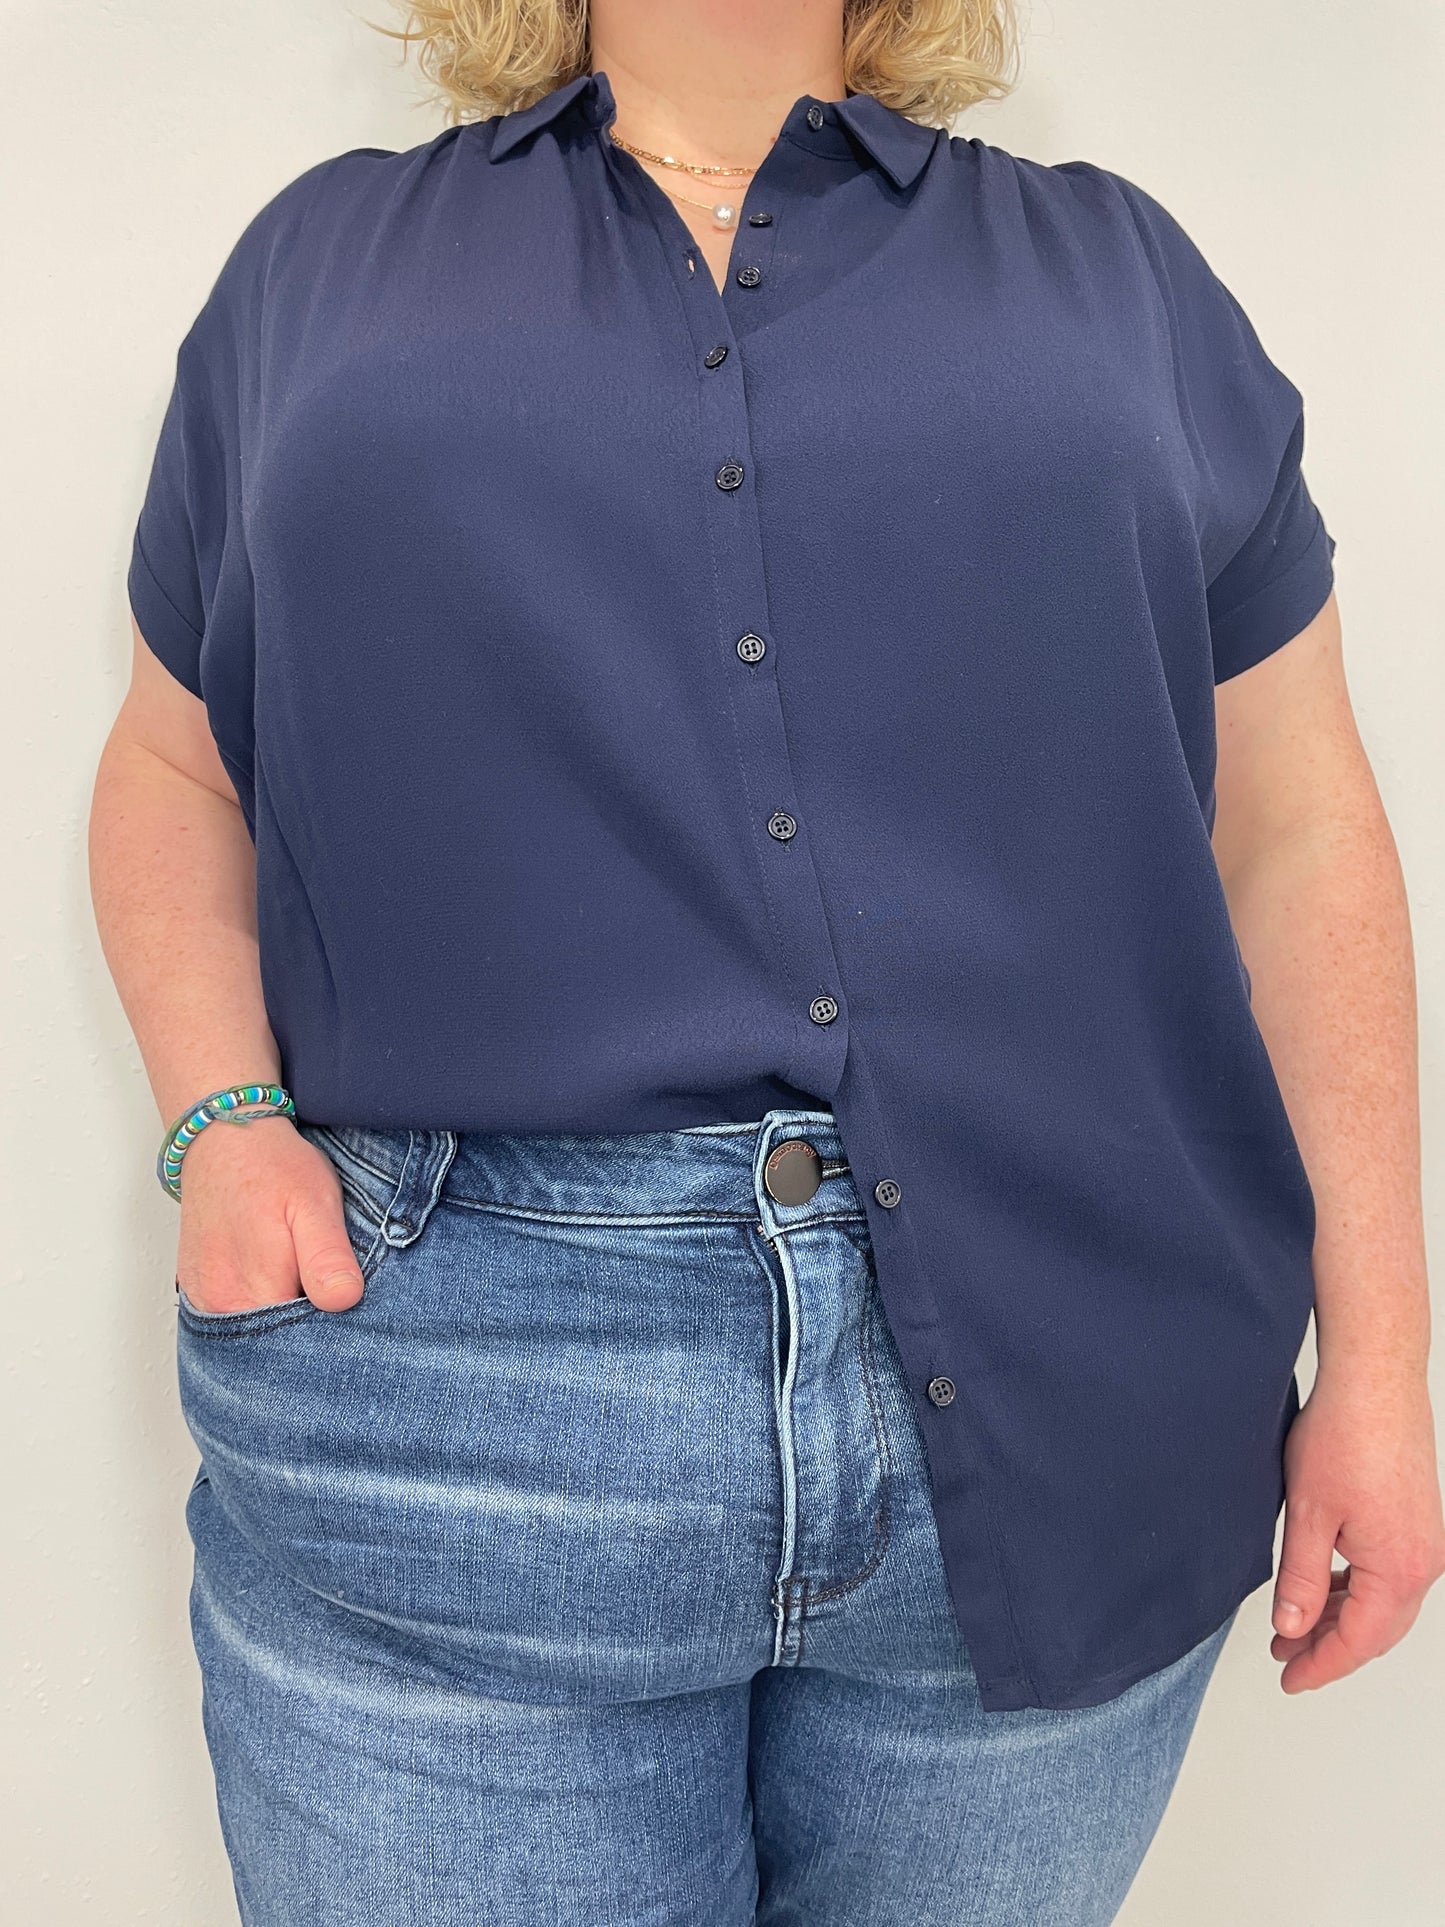 SHORT SLEEVE SOLID BUTTON UP - NAVY